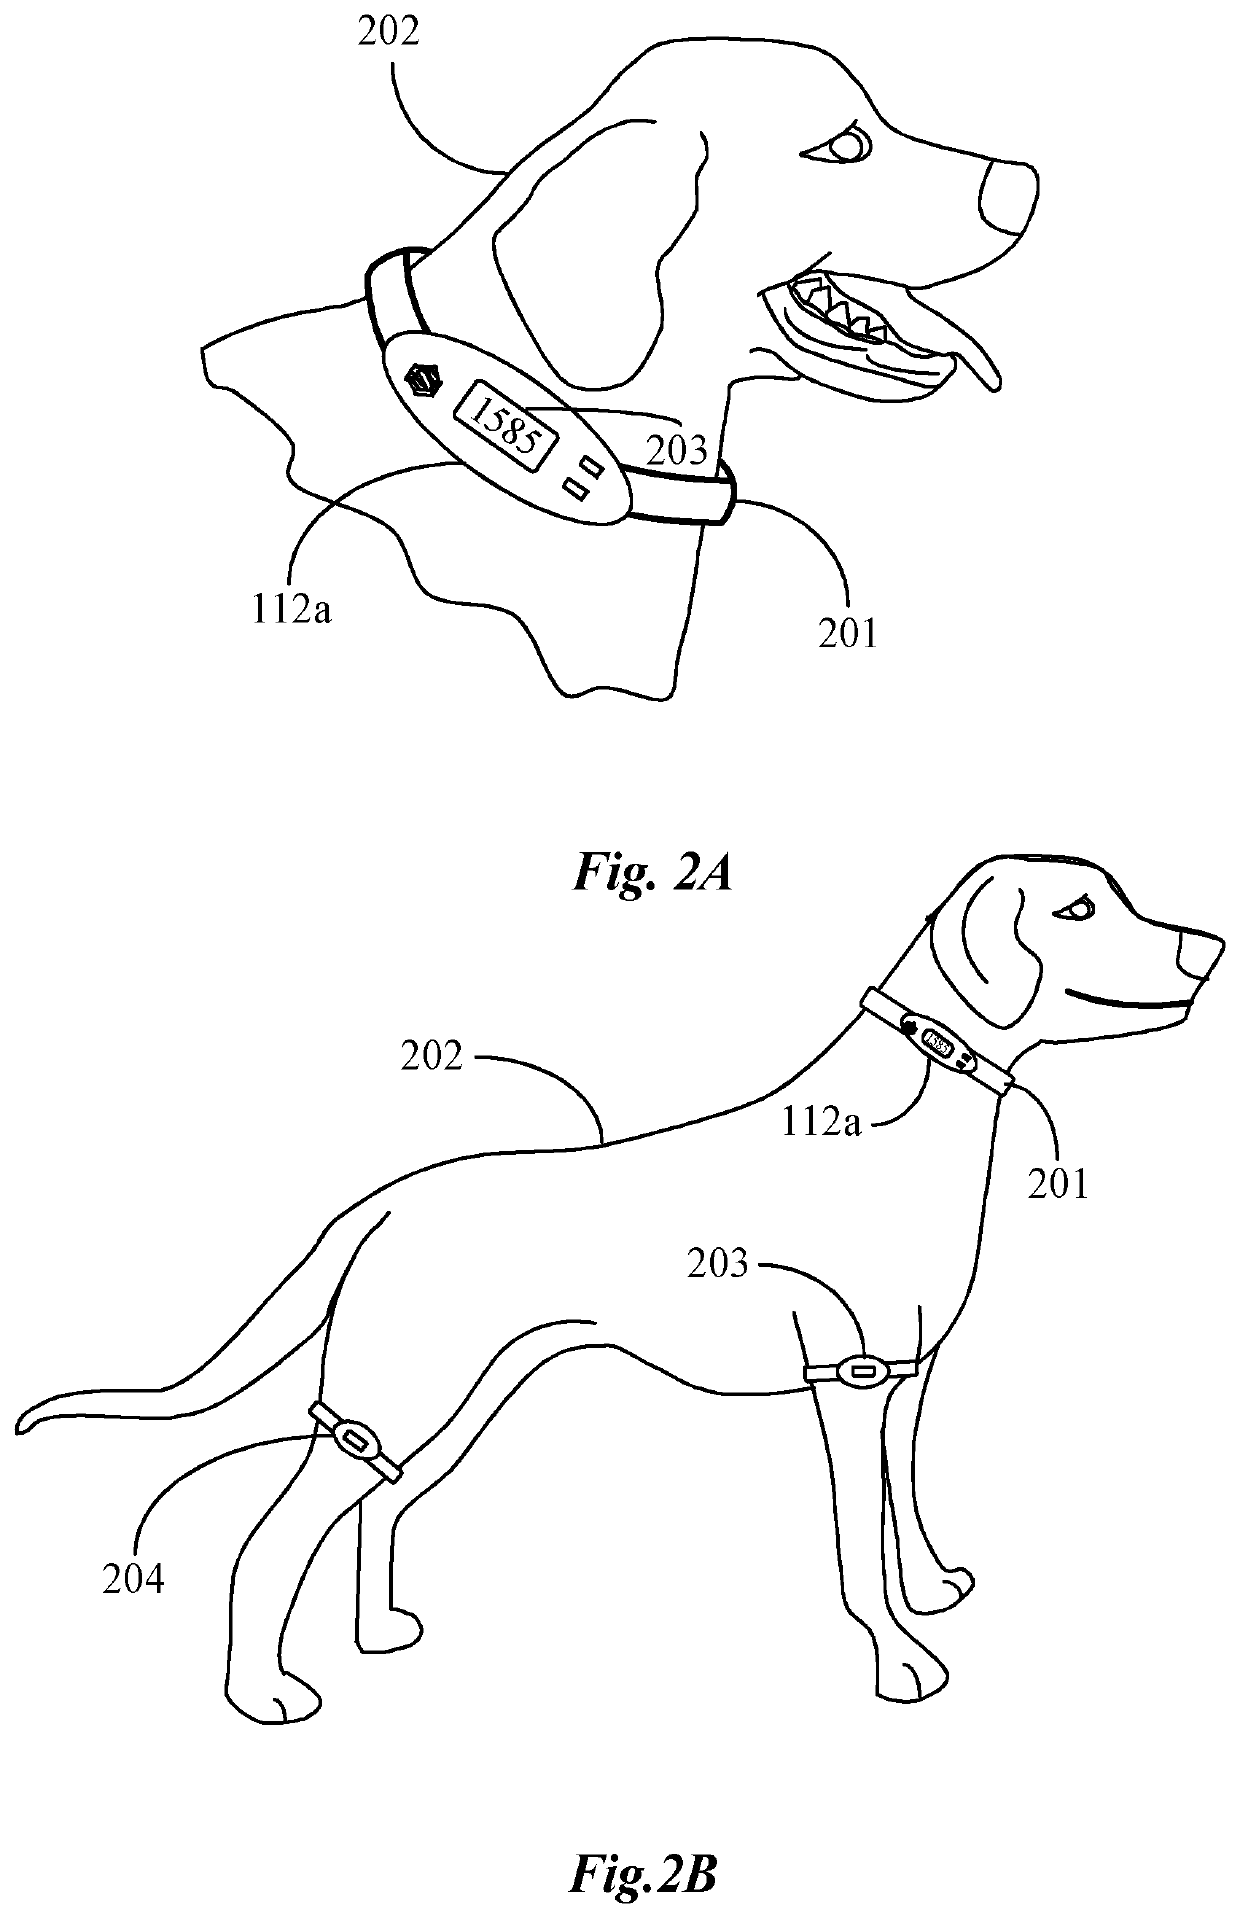 Network-based pet tracking and reporting system